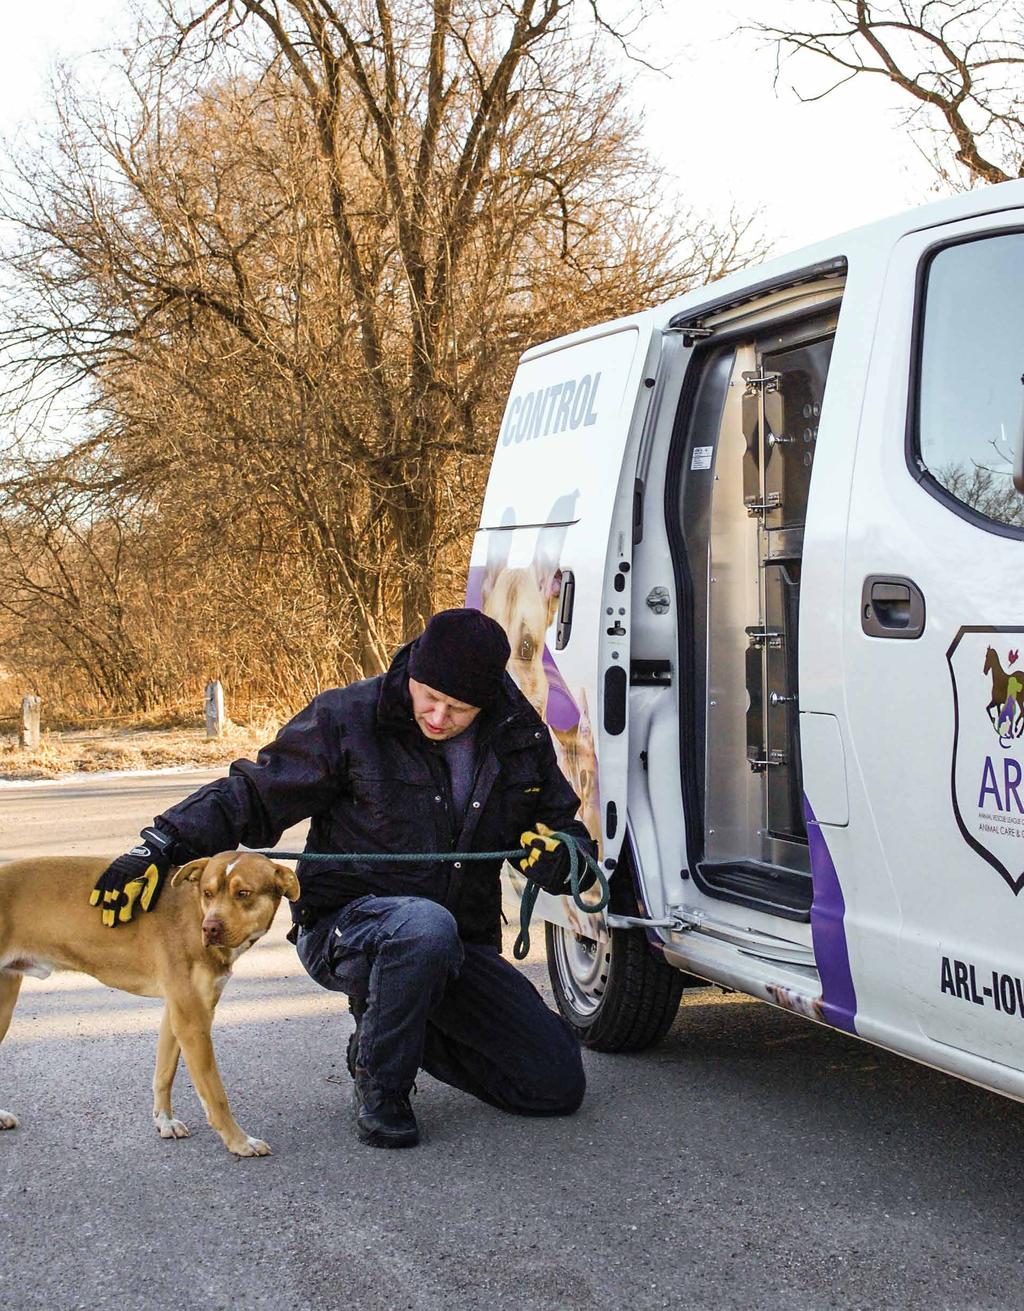 animal care and control 12,160 DISPATCHED TRIPS AND FOLLOW-UPS 96 PETS MICROCHIPPED AT ACC MICROCHIP CLINICS The ARL was made aware of a dog located in DeWitt, IA, that was outside without adequate